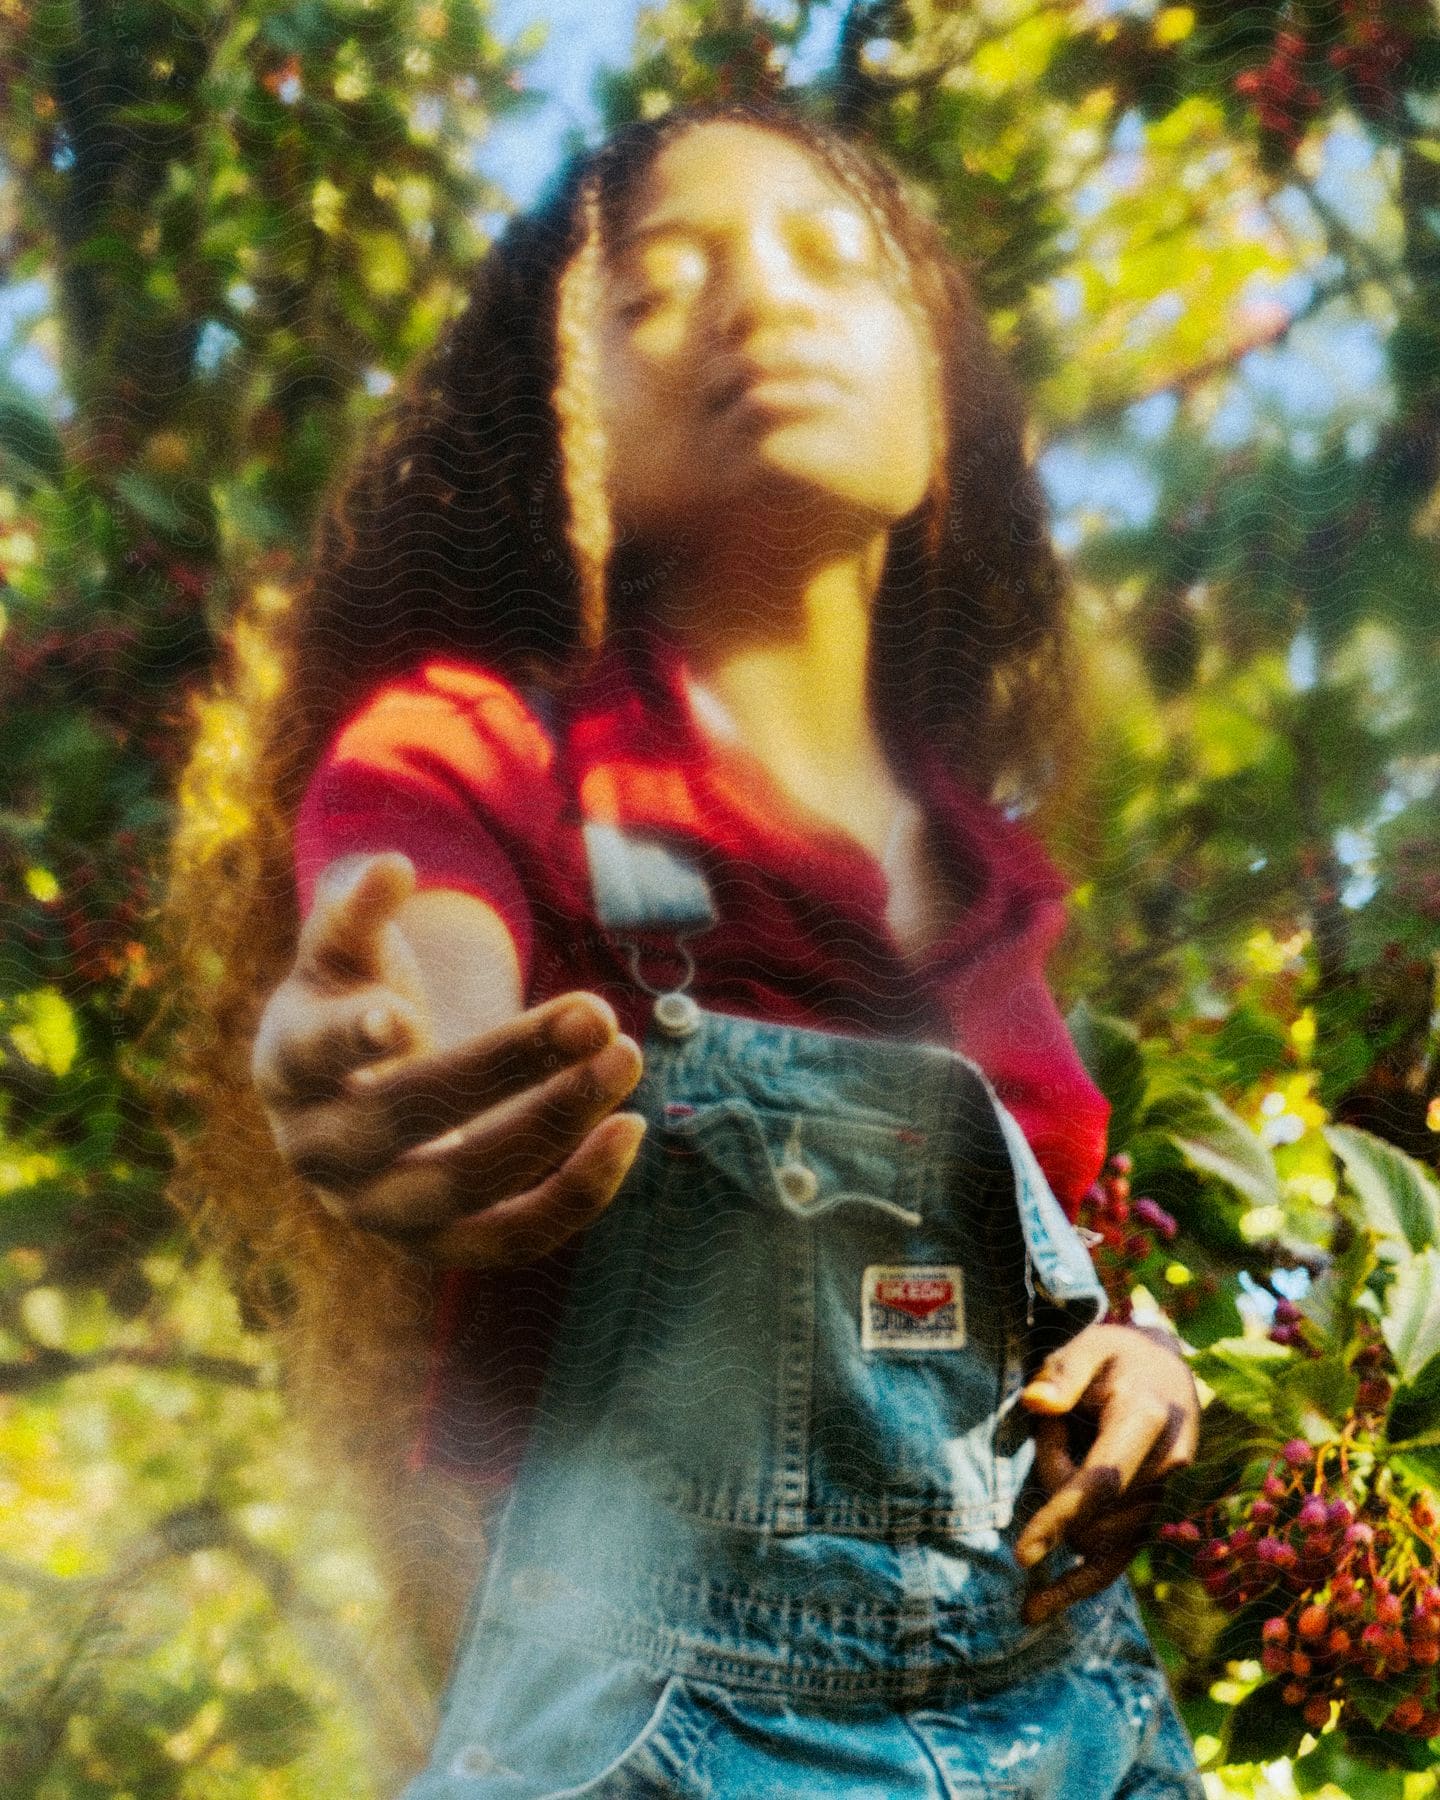 A person with closed eyes reaches towards the camera in a dreamy, sunlit garden setting.